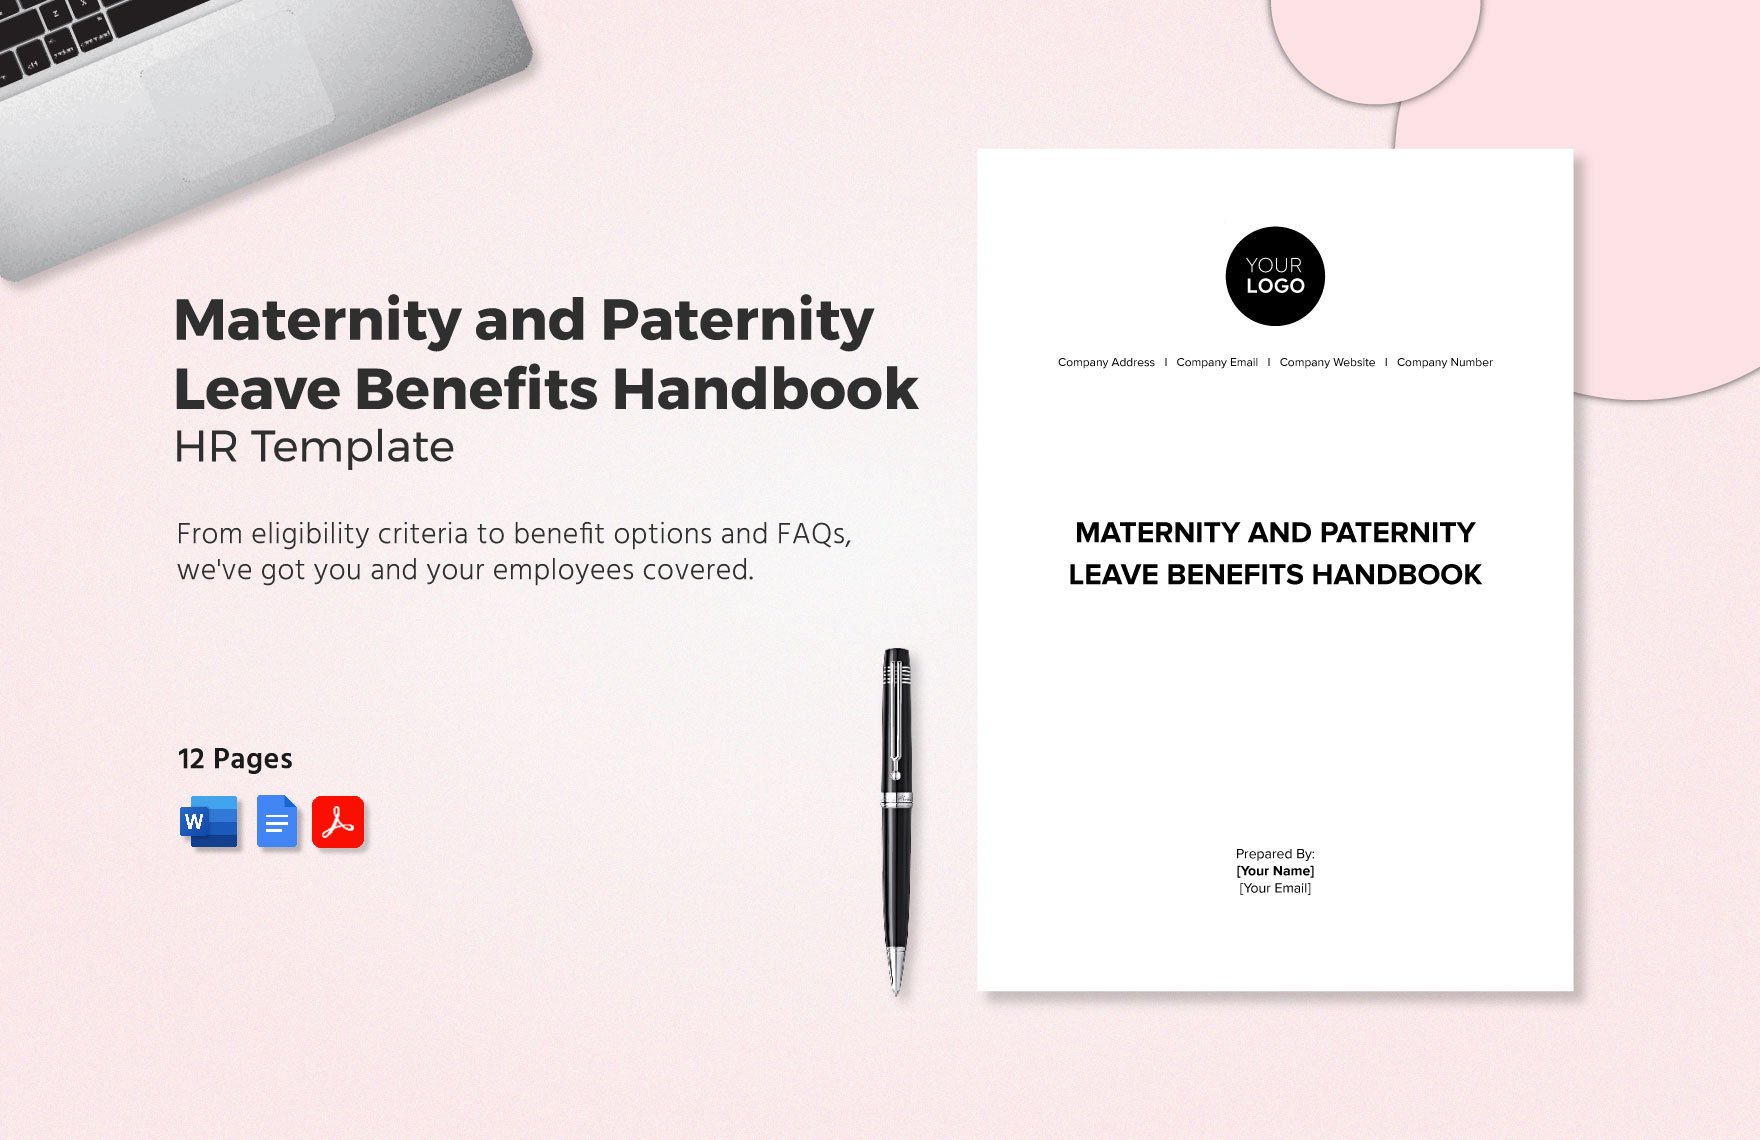 Maternity and Paternity Leave Benefits Handbook HR Template